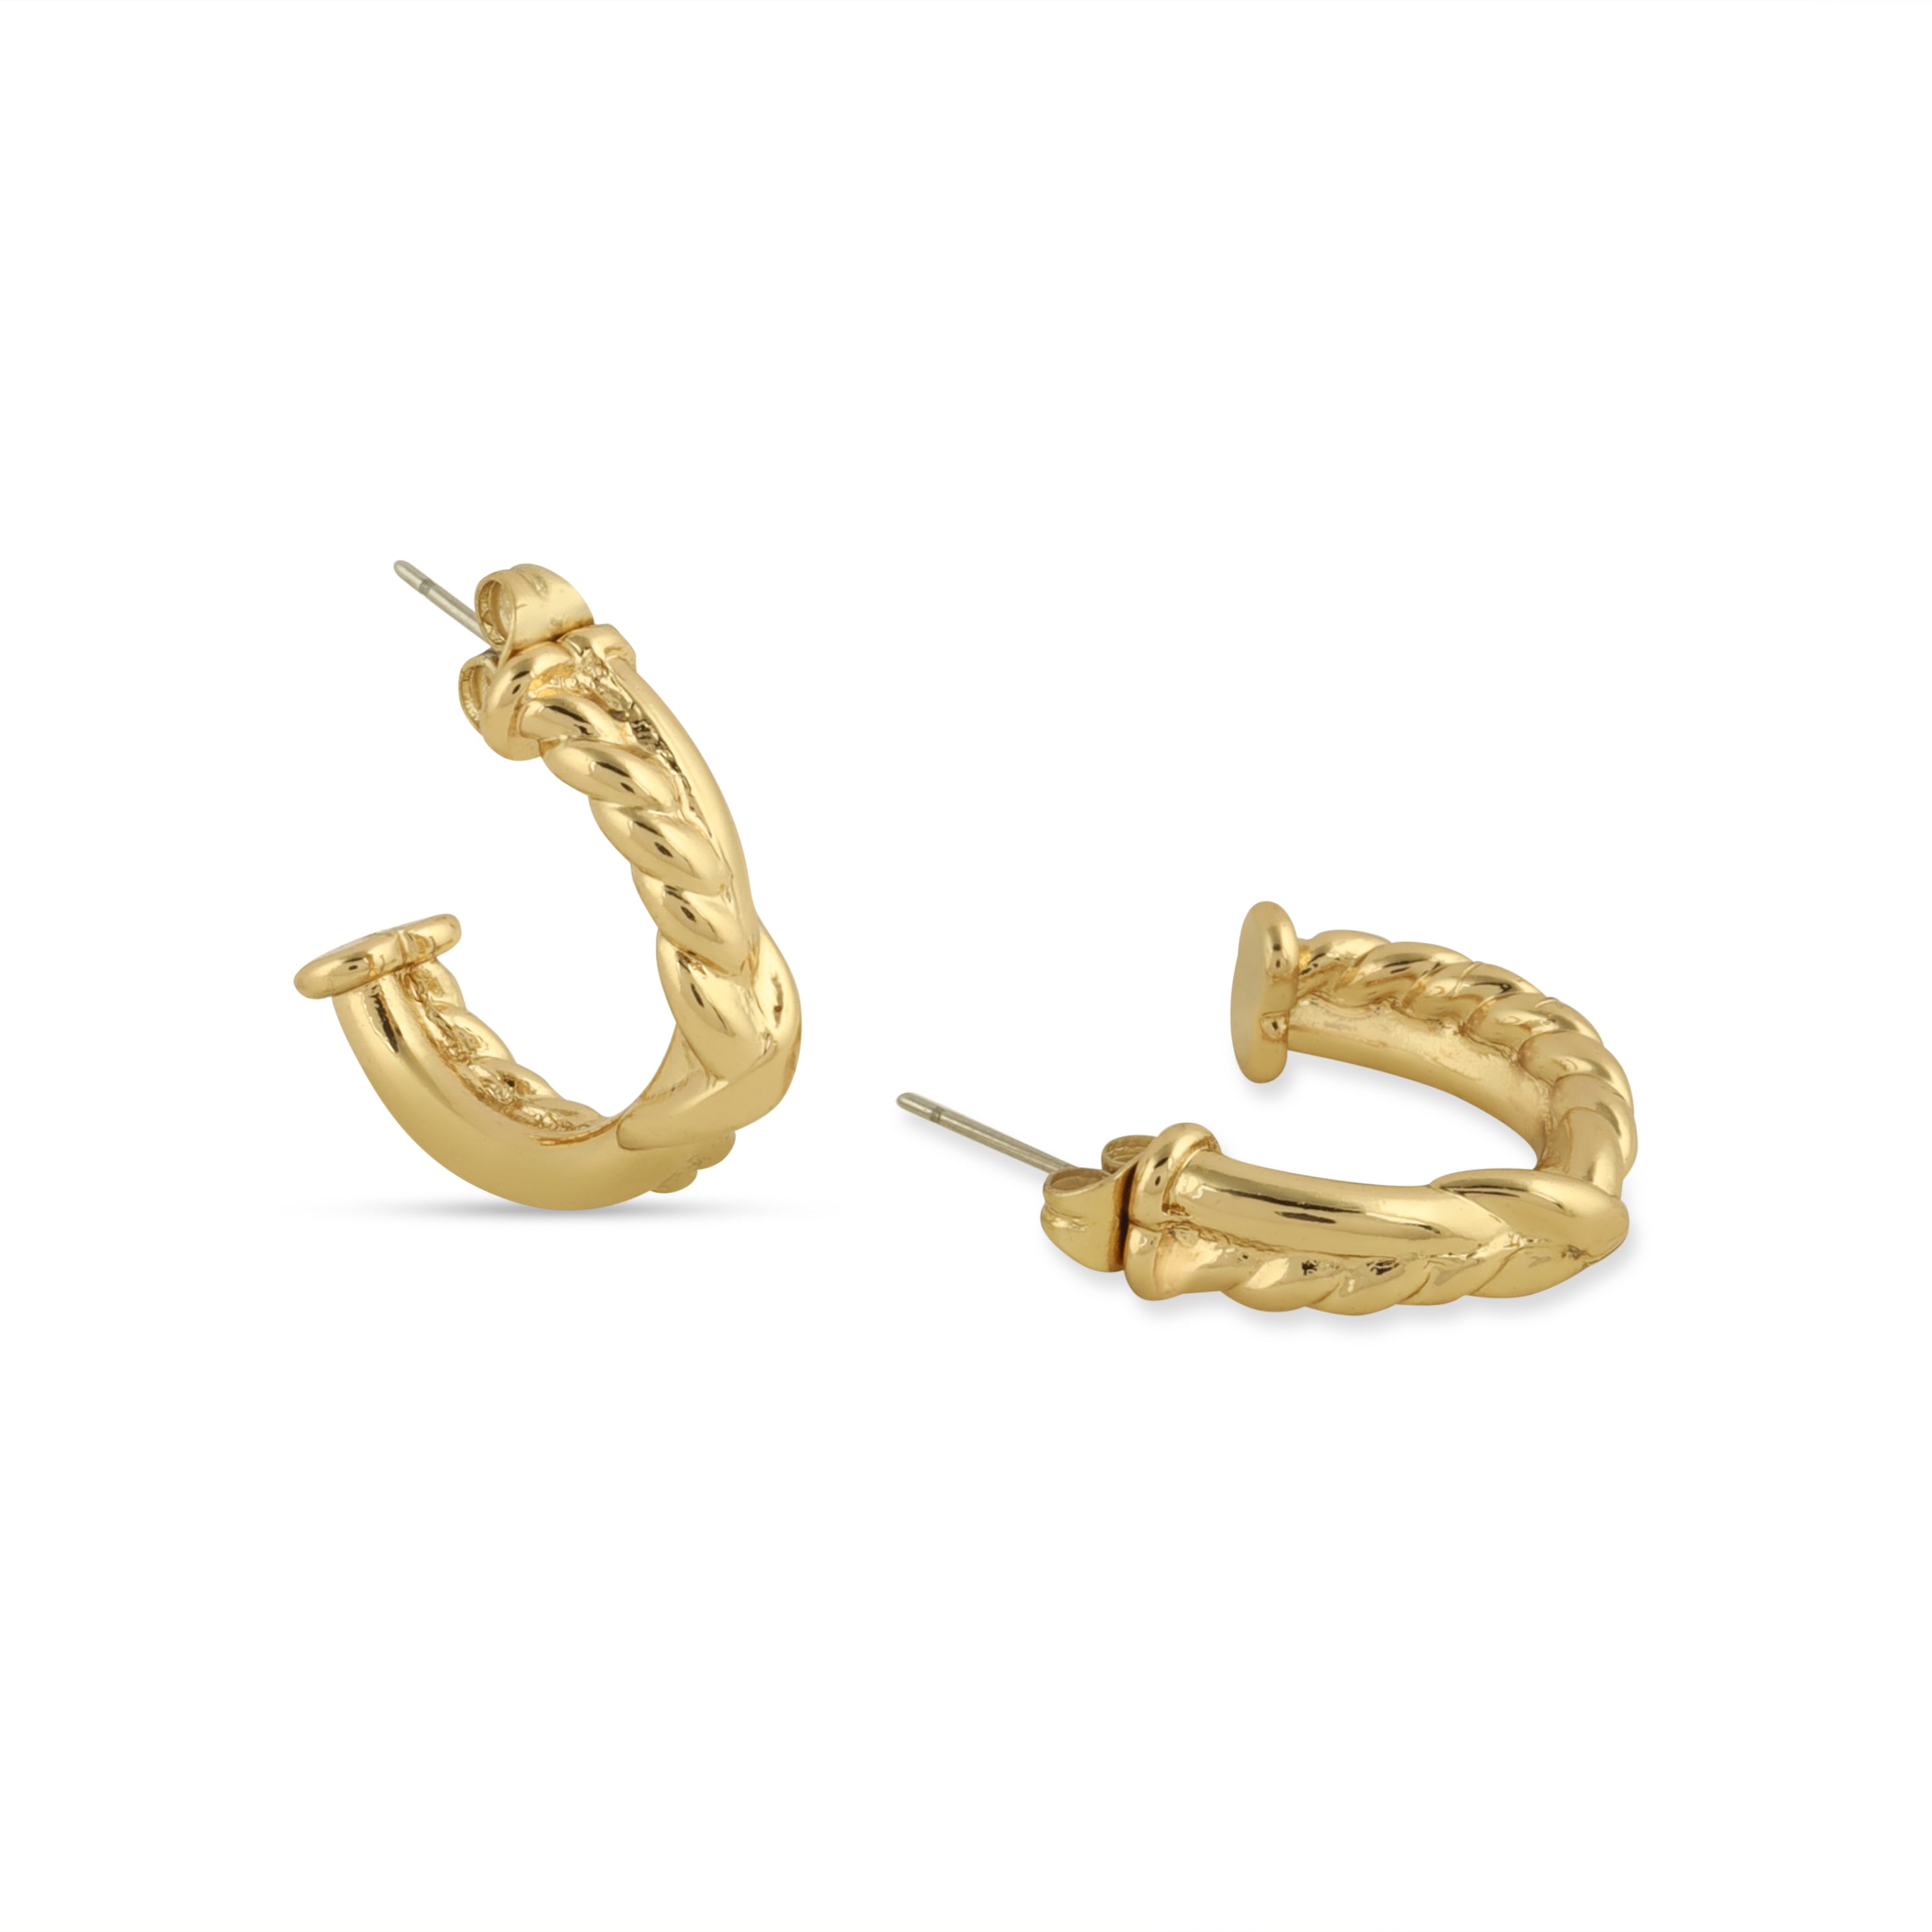 TFC Half n Half Curly Gold Plated Hoop Earrings- Discover daily wear gold earrings including stud earrings, hoop earrings, and pearl earrings, perfect as earrings for women and earrings for girls.Find the cheapest fashion jewellery which is anti-tarnis​h only at The Fun company.